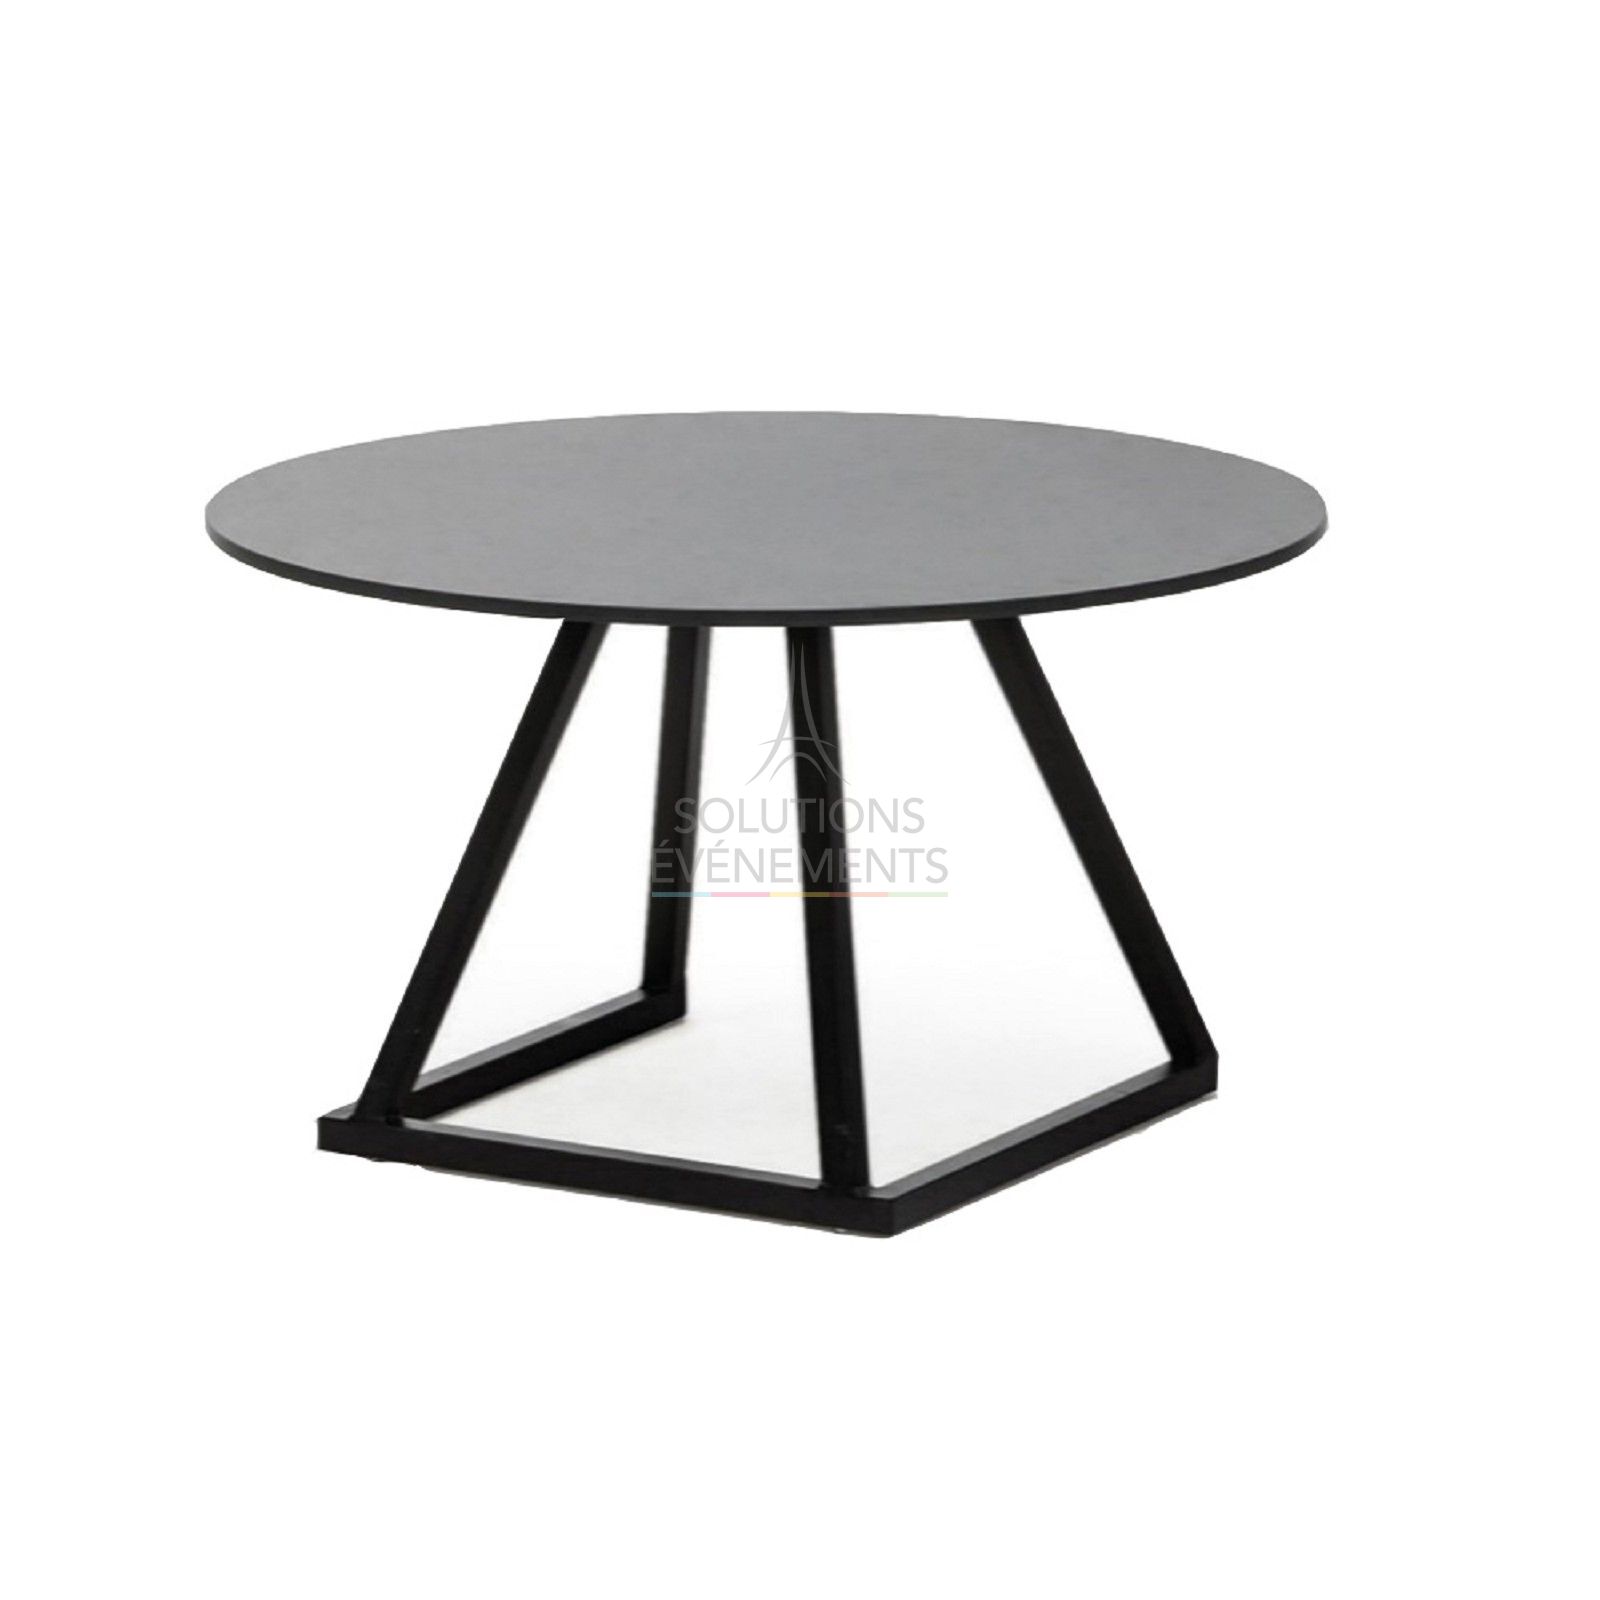 Rental of small Linea lounge coffee table with round top.